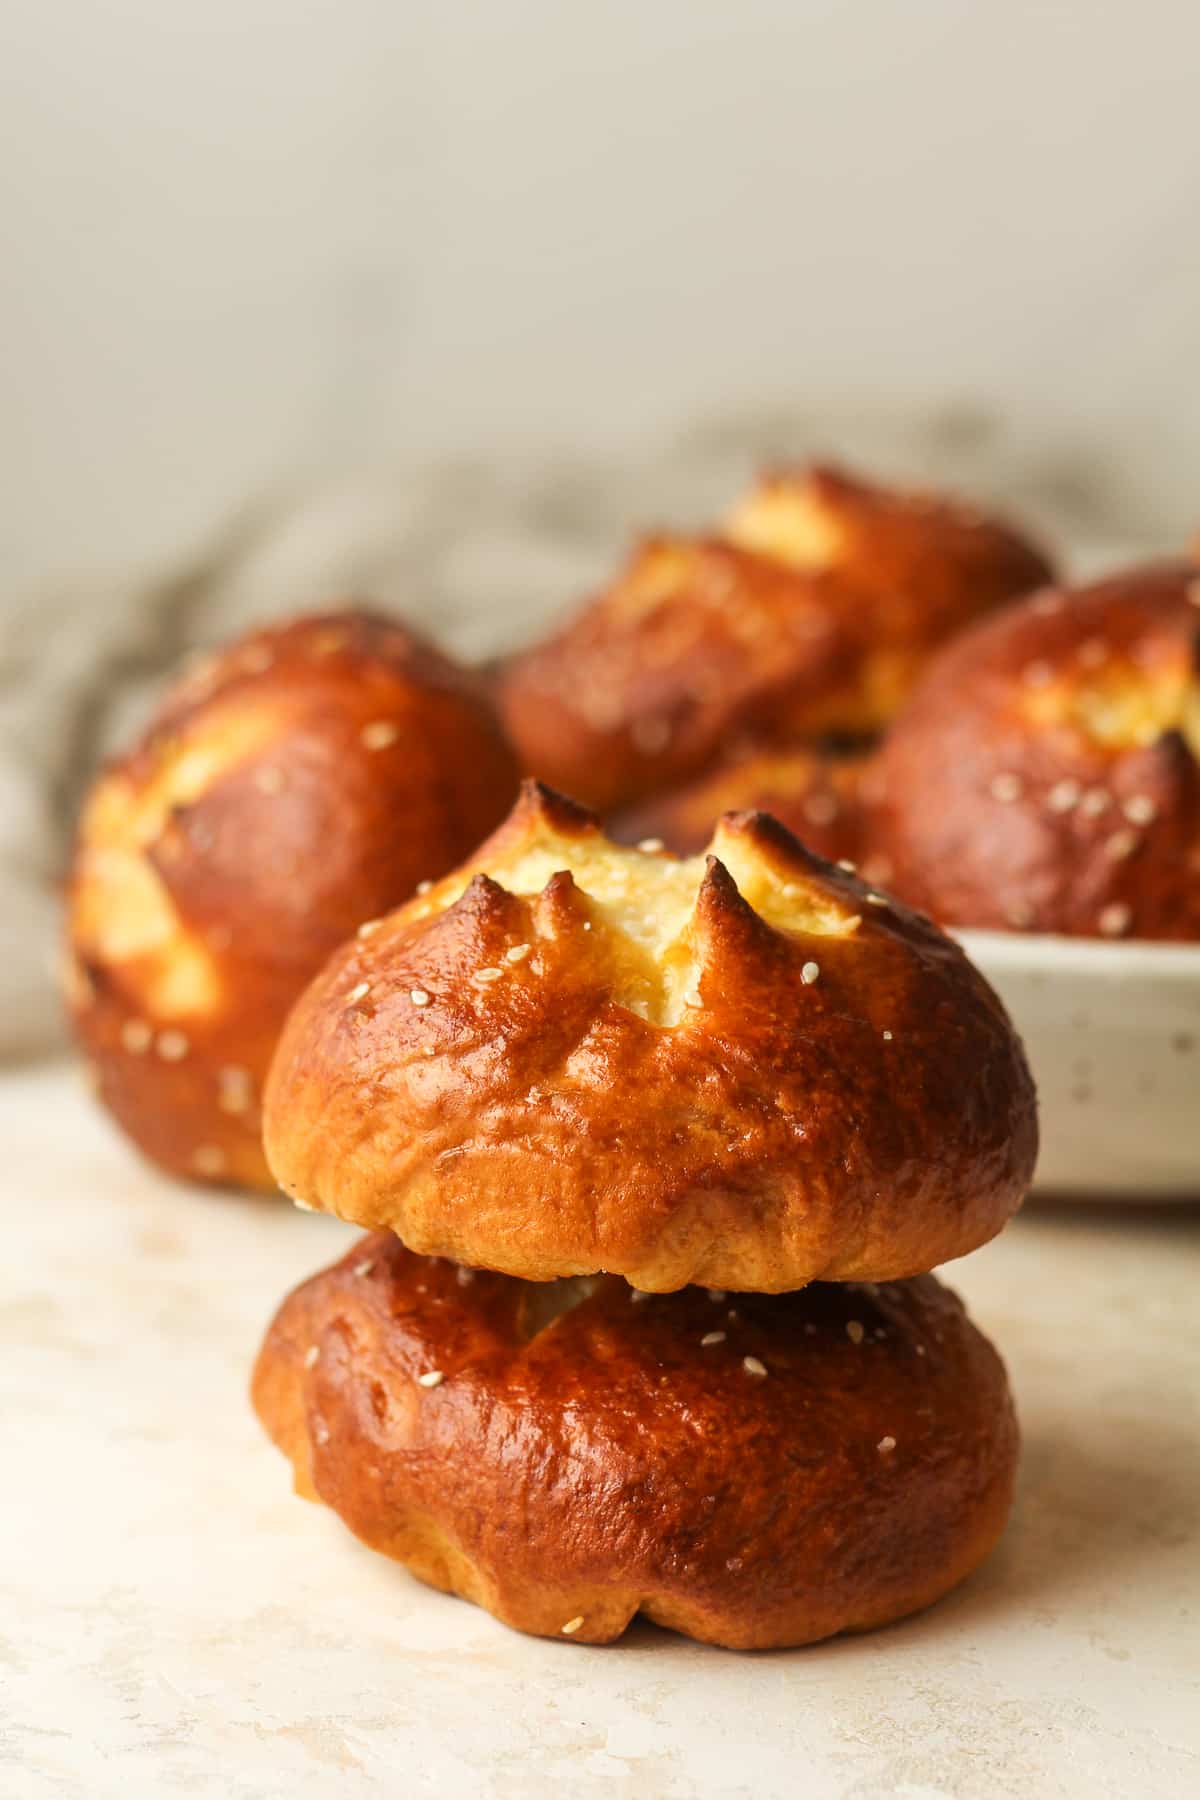 A stack of two pretzel buns in front of a bowl of buns.